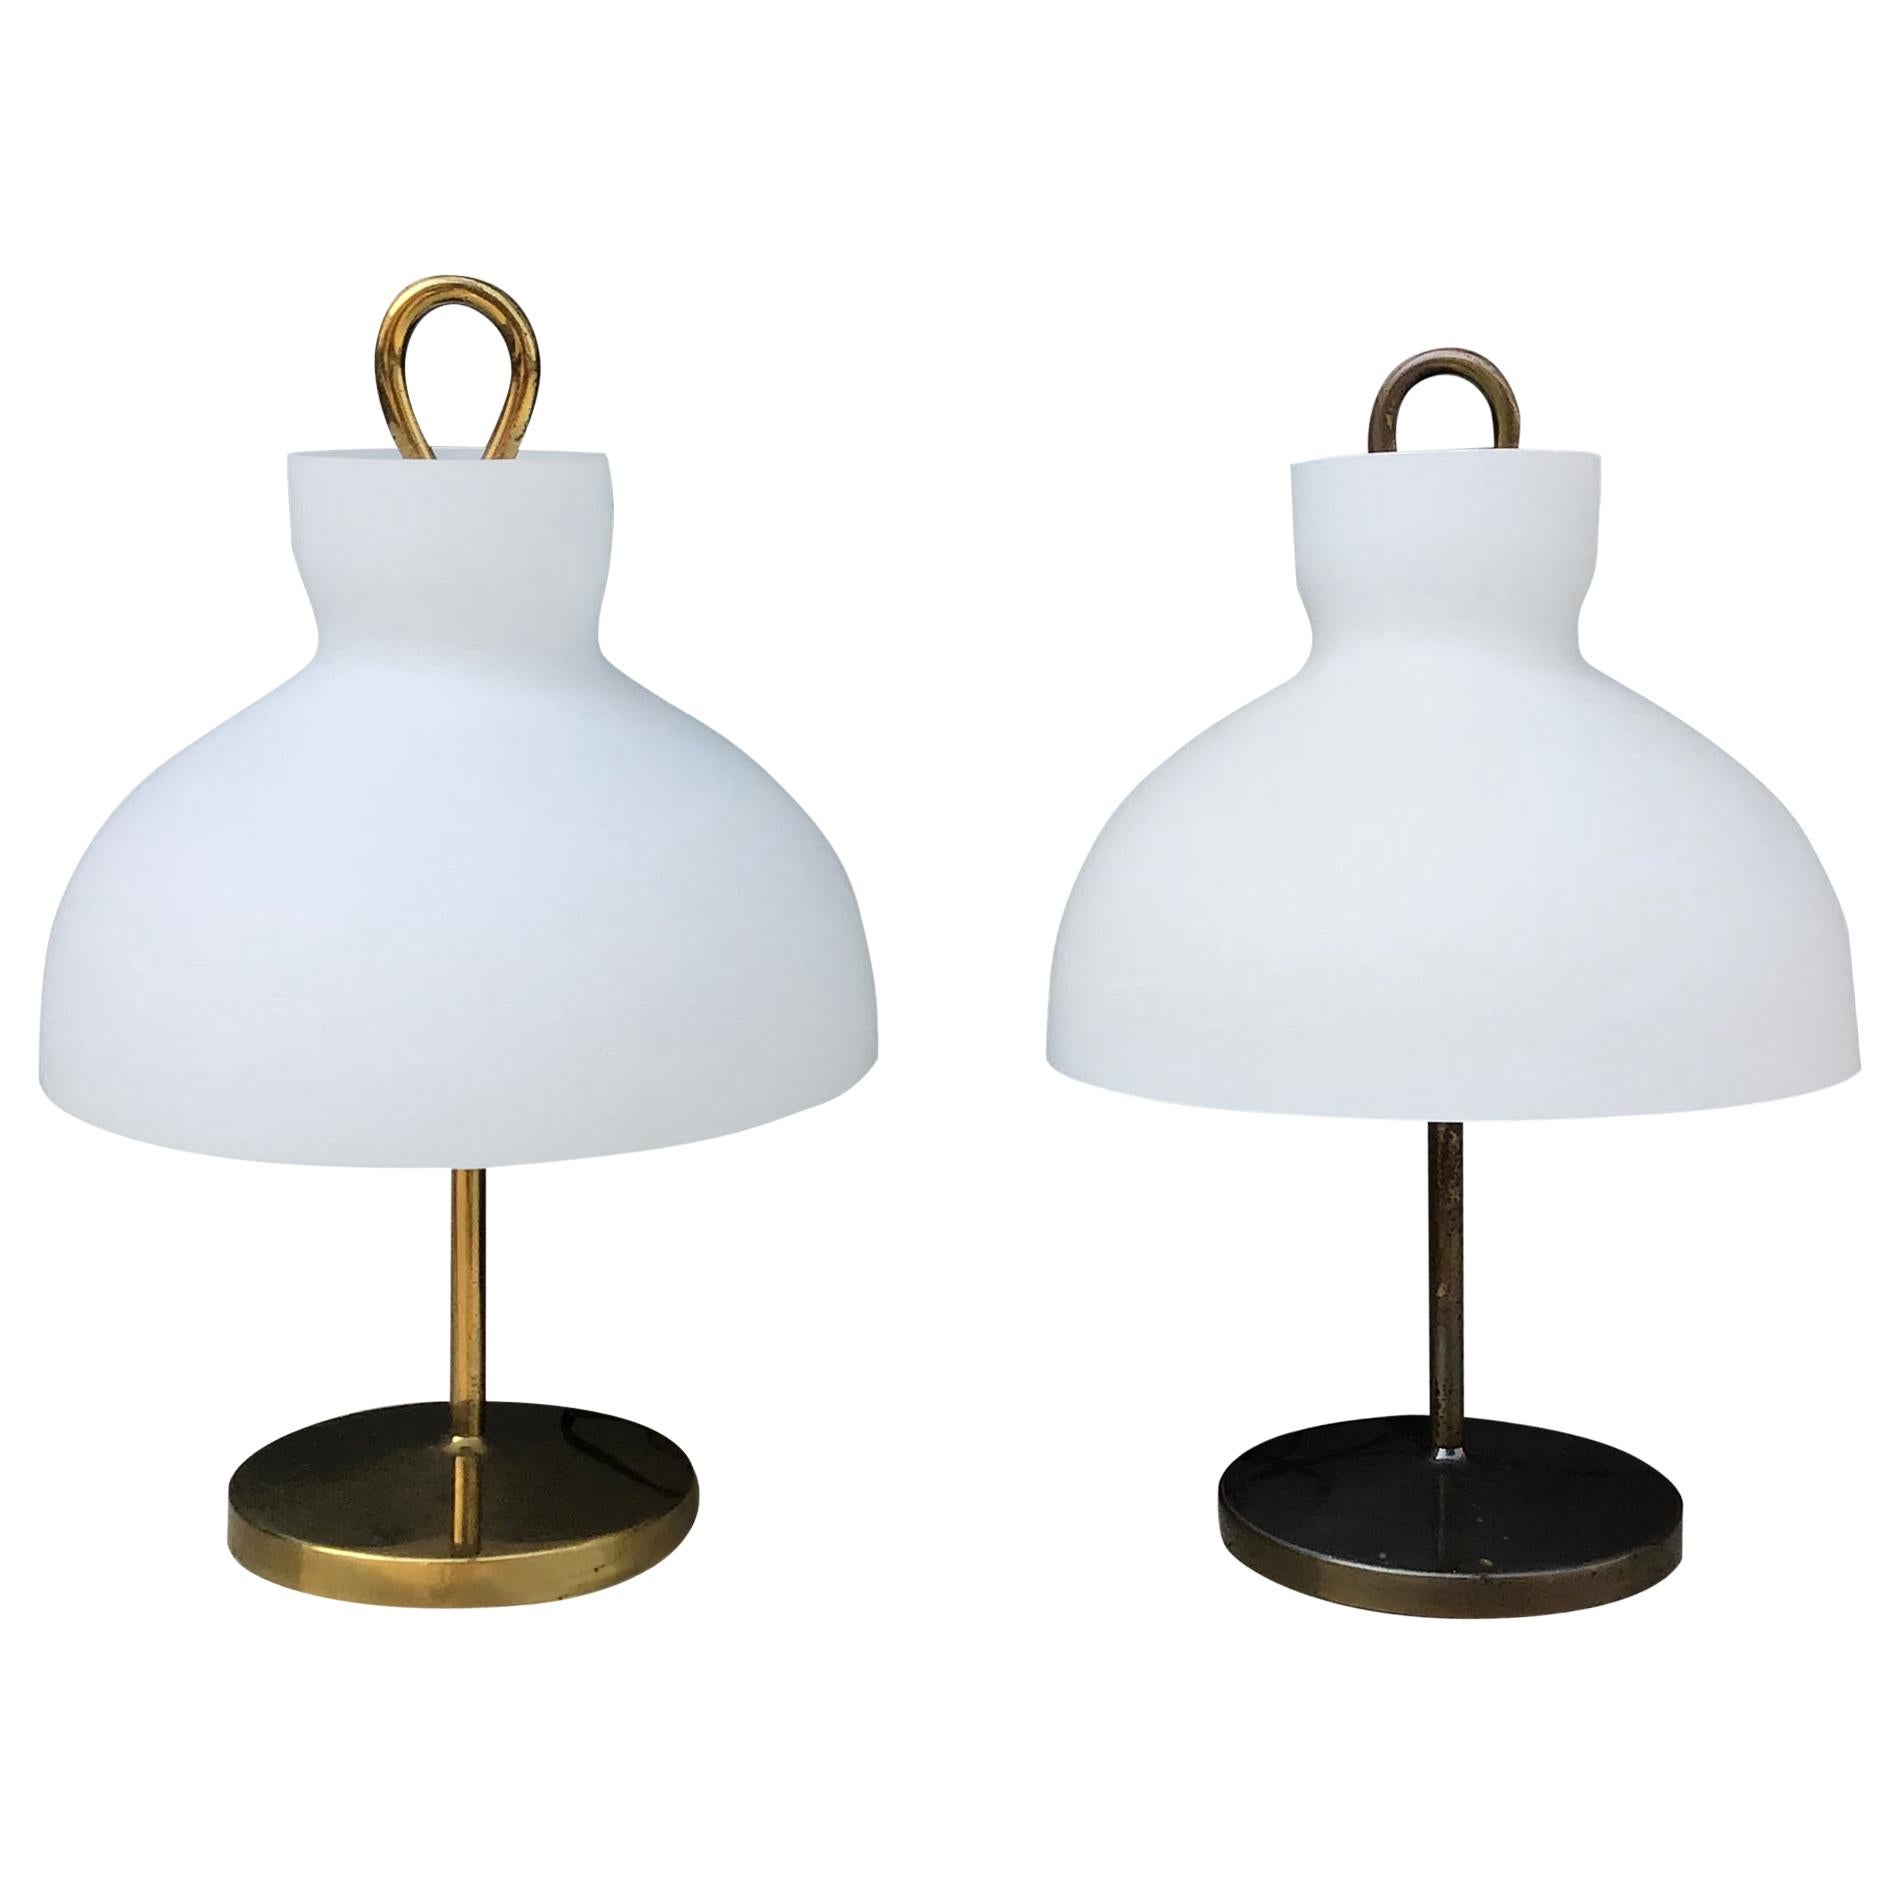 Ignazio Gardella Table Lamps Azucena Brass and Opaline Glass 1950 Italy For Sale